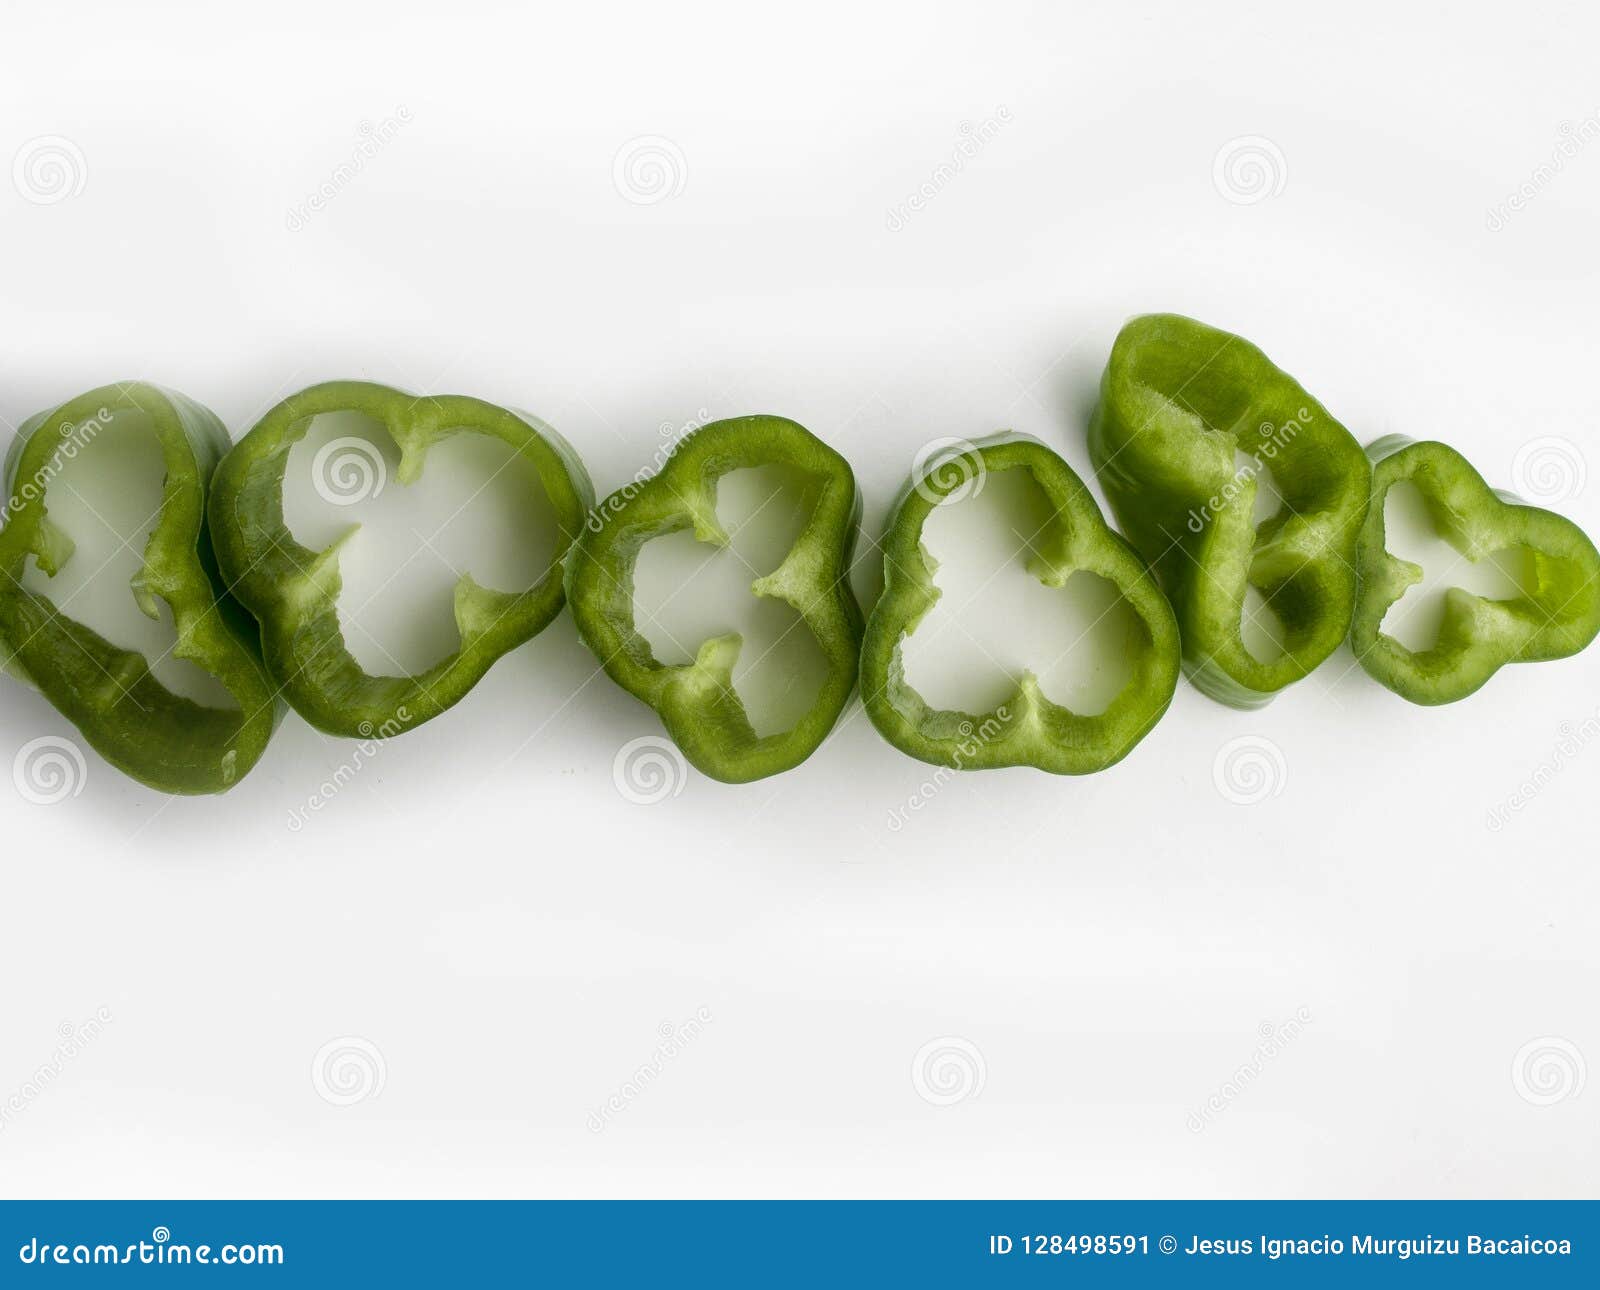 aerial view of some cuts of green peppers